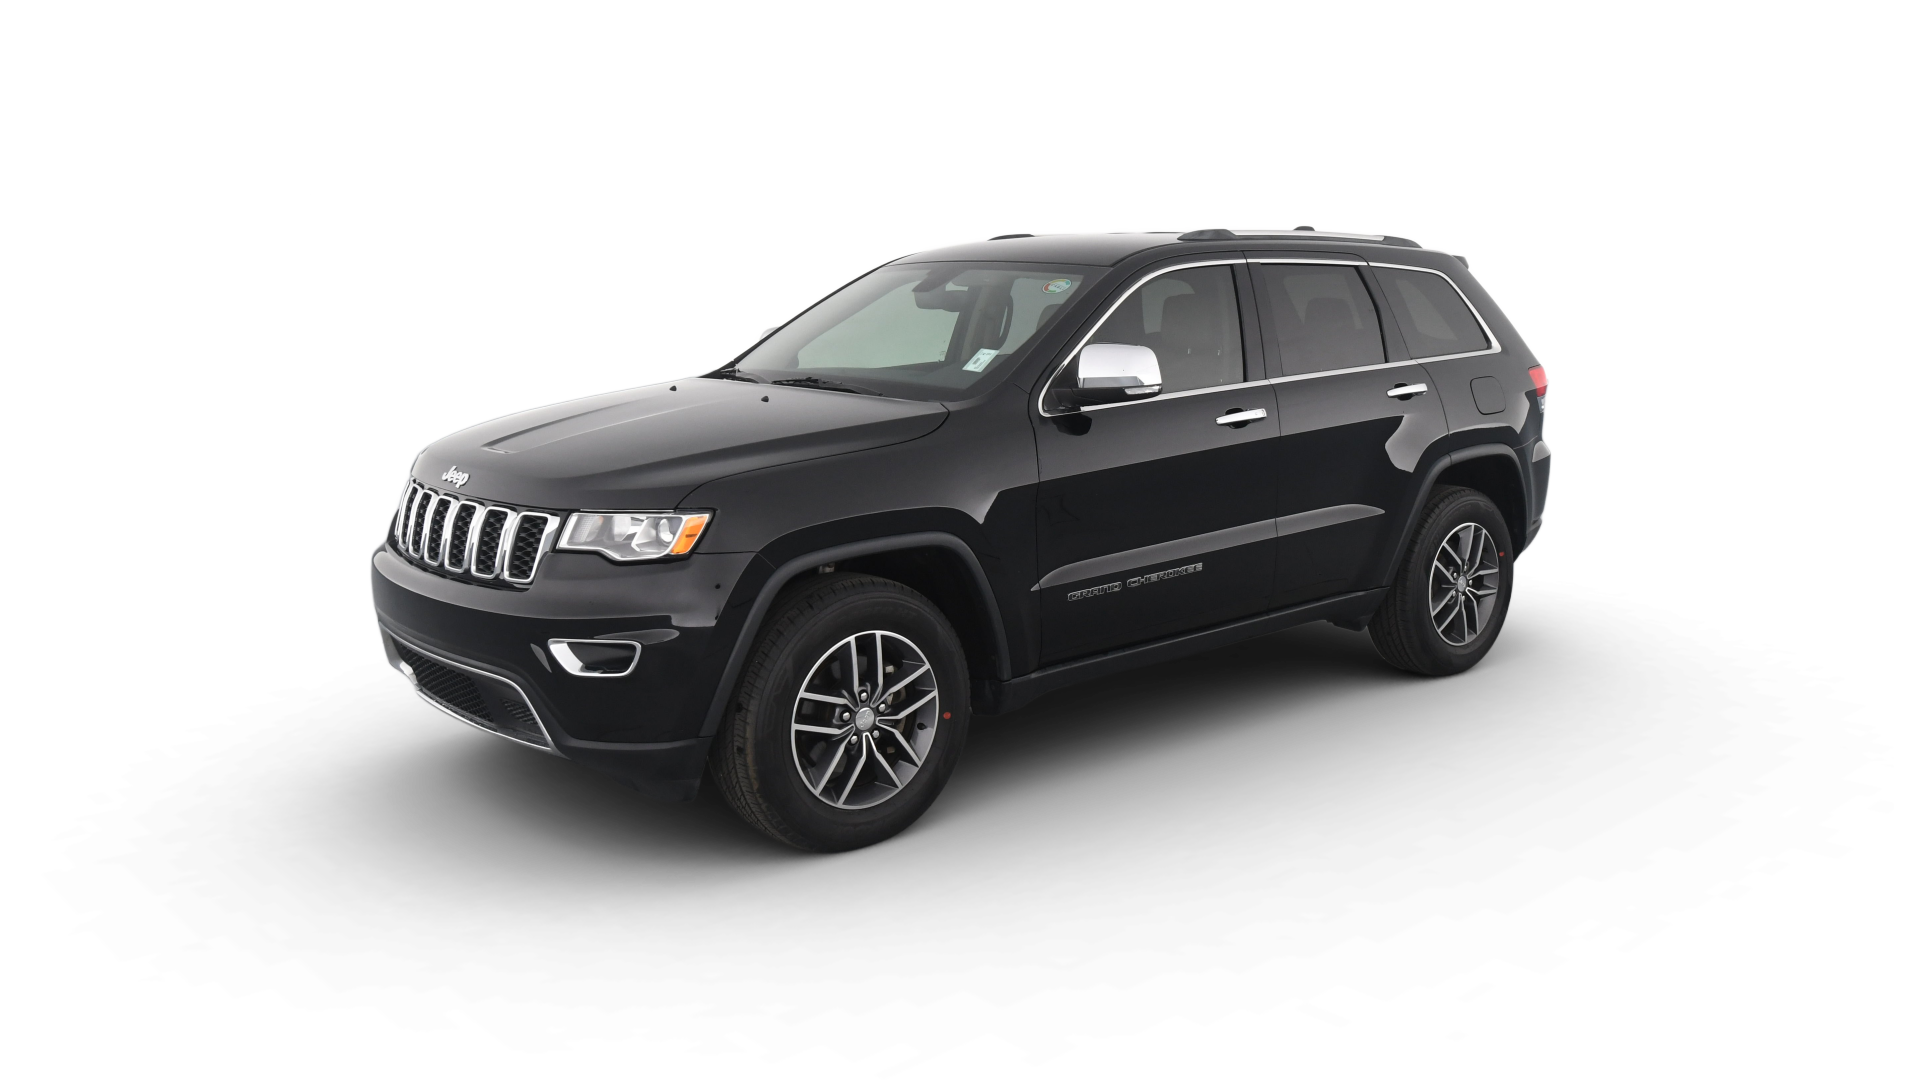 Used 2018 Jeep Grand Cherokee For Sale Online | Carvana